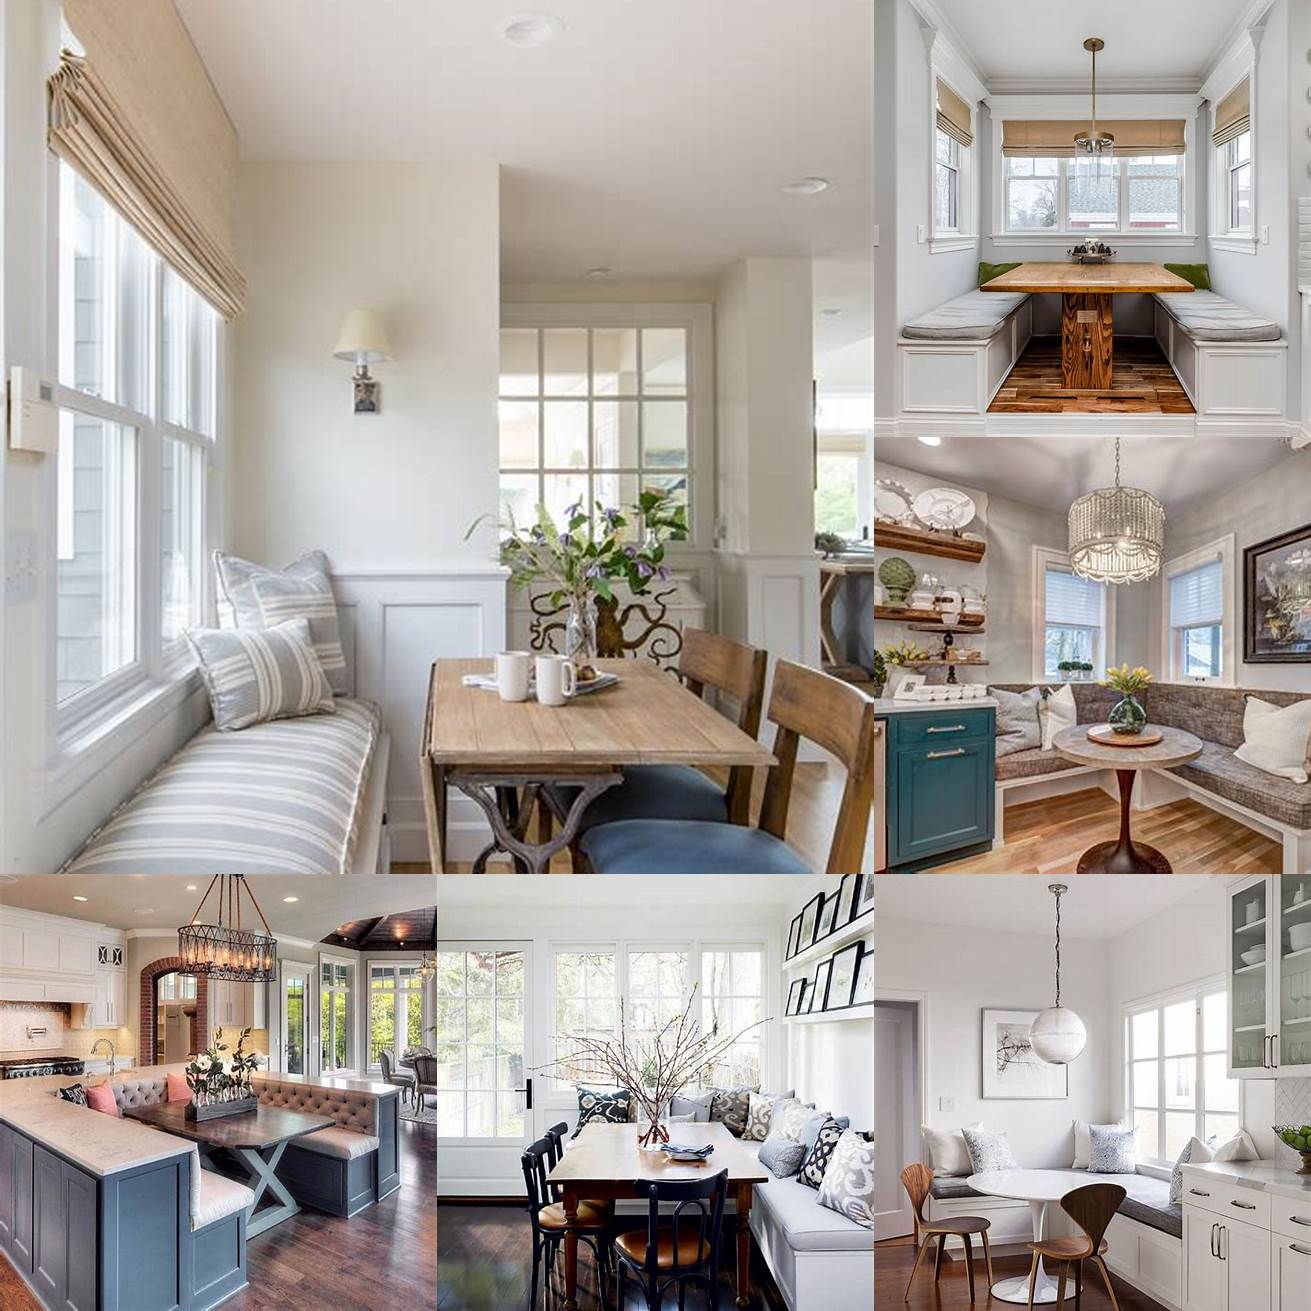 6 An open concept kitchen with a cozy breakfast nook and built-in banquette seating